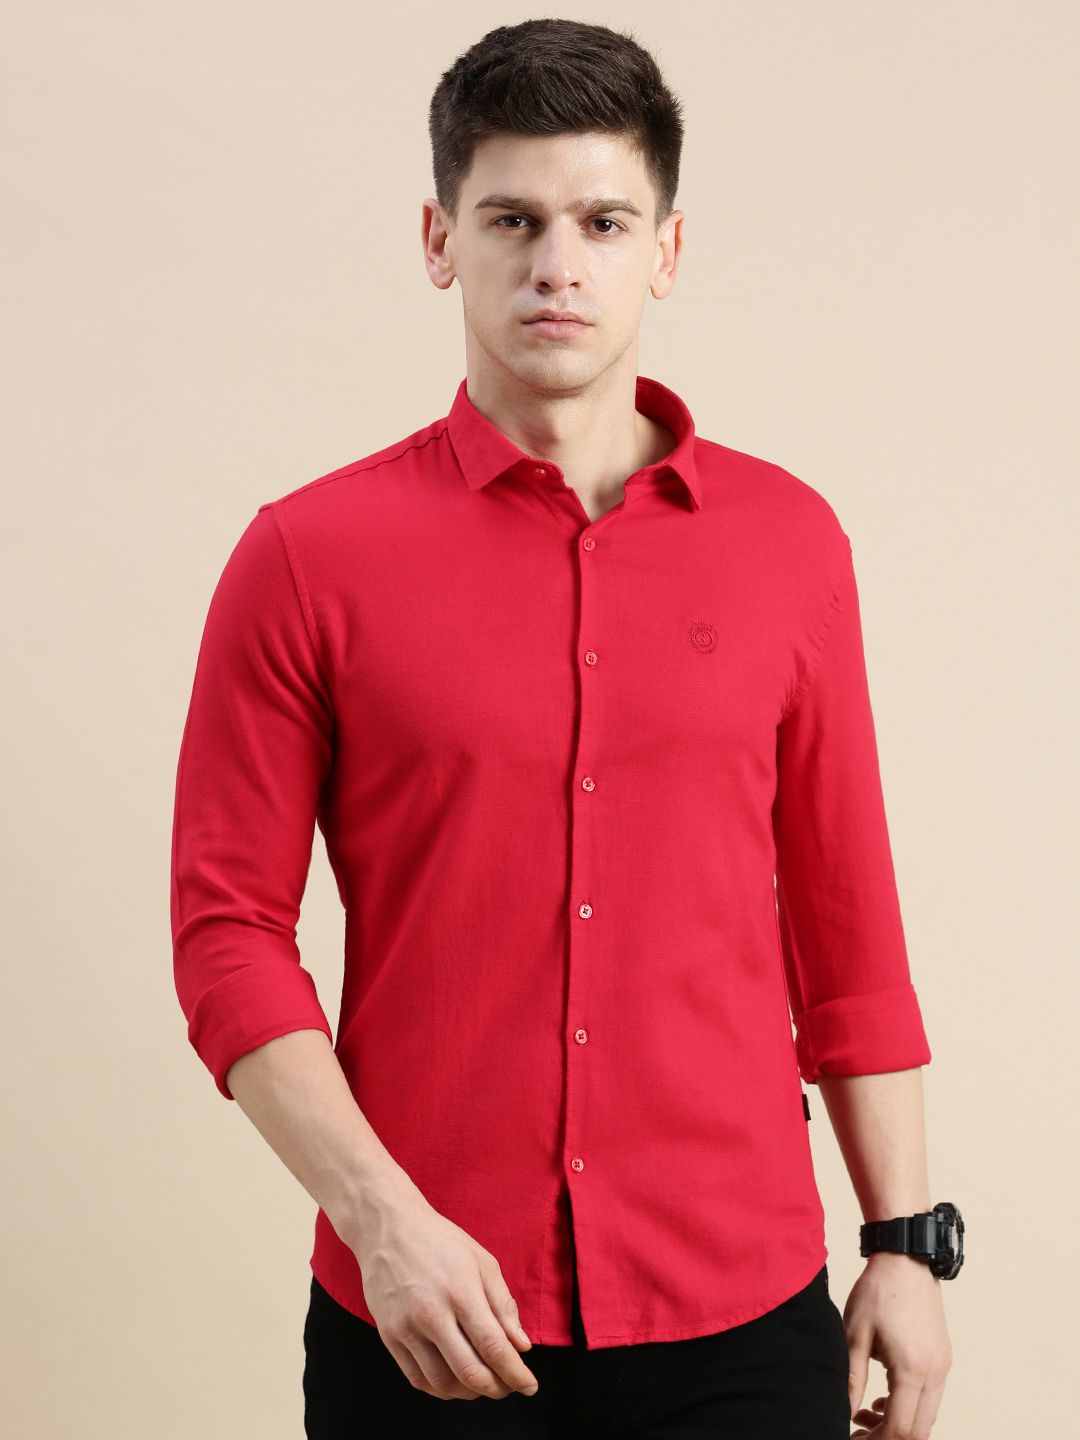     			Showoff Cotton Blend Regular Fit Solids Full Sleeves Men's Casual Shirt - Red ( Pack of 1 )